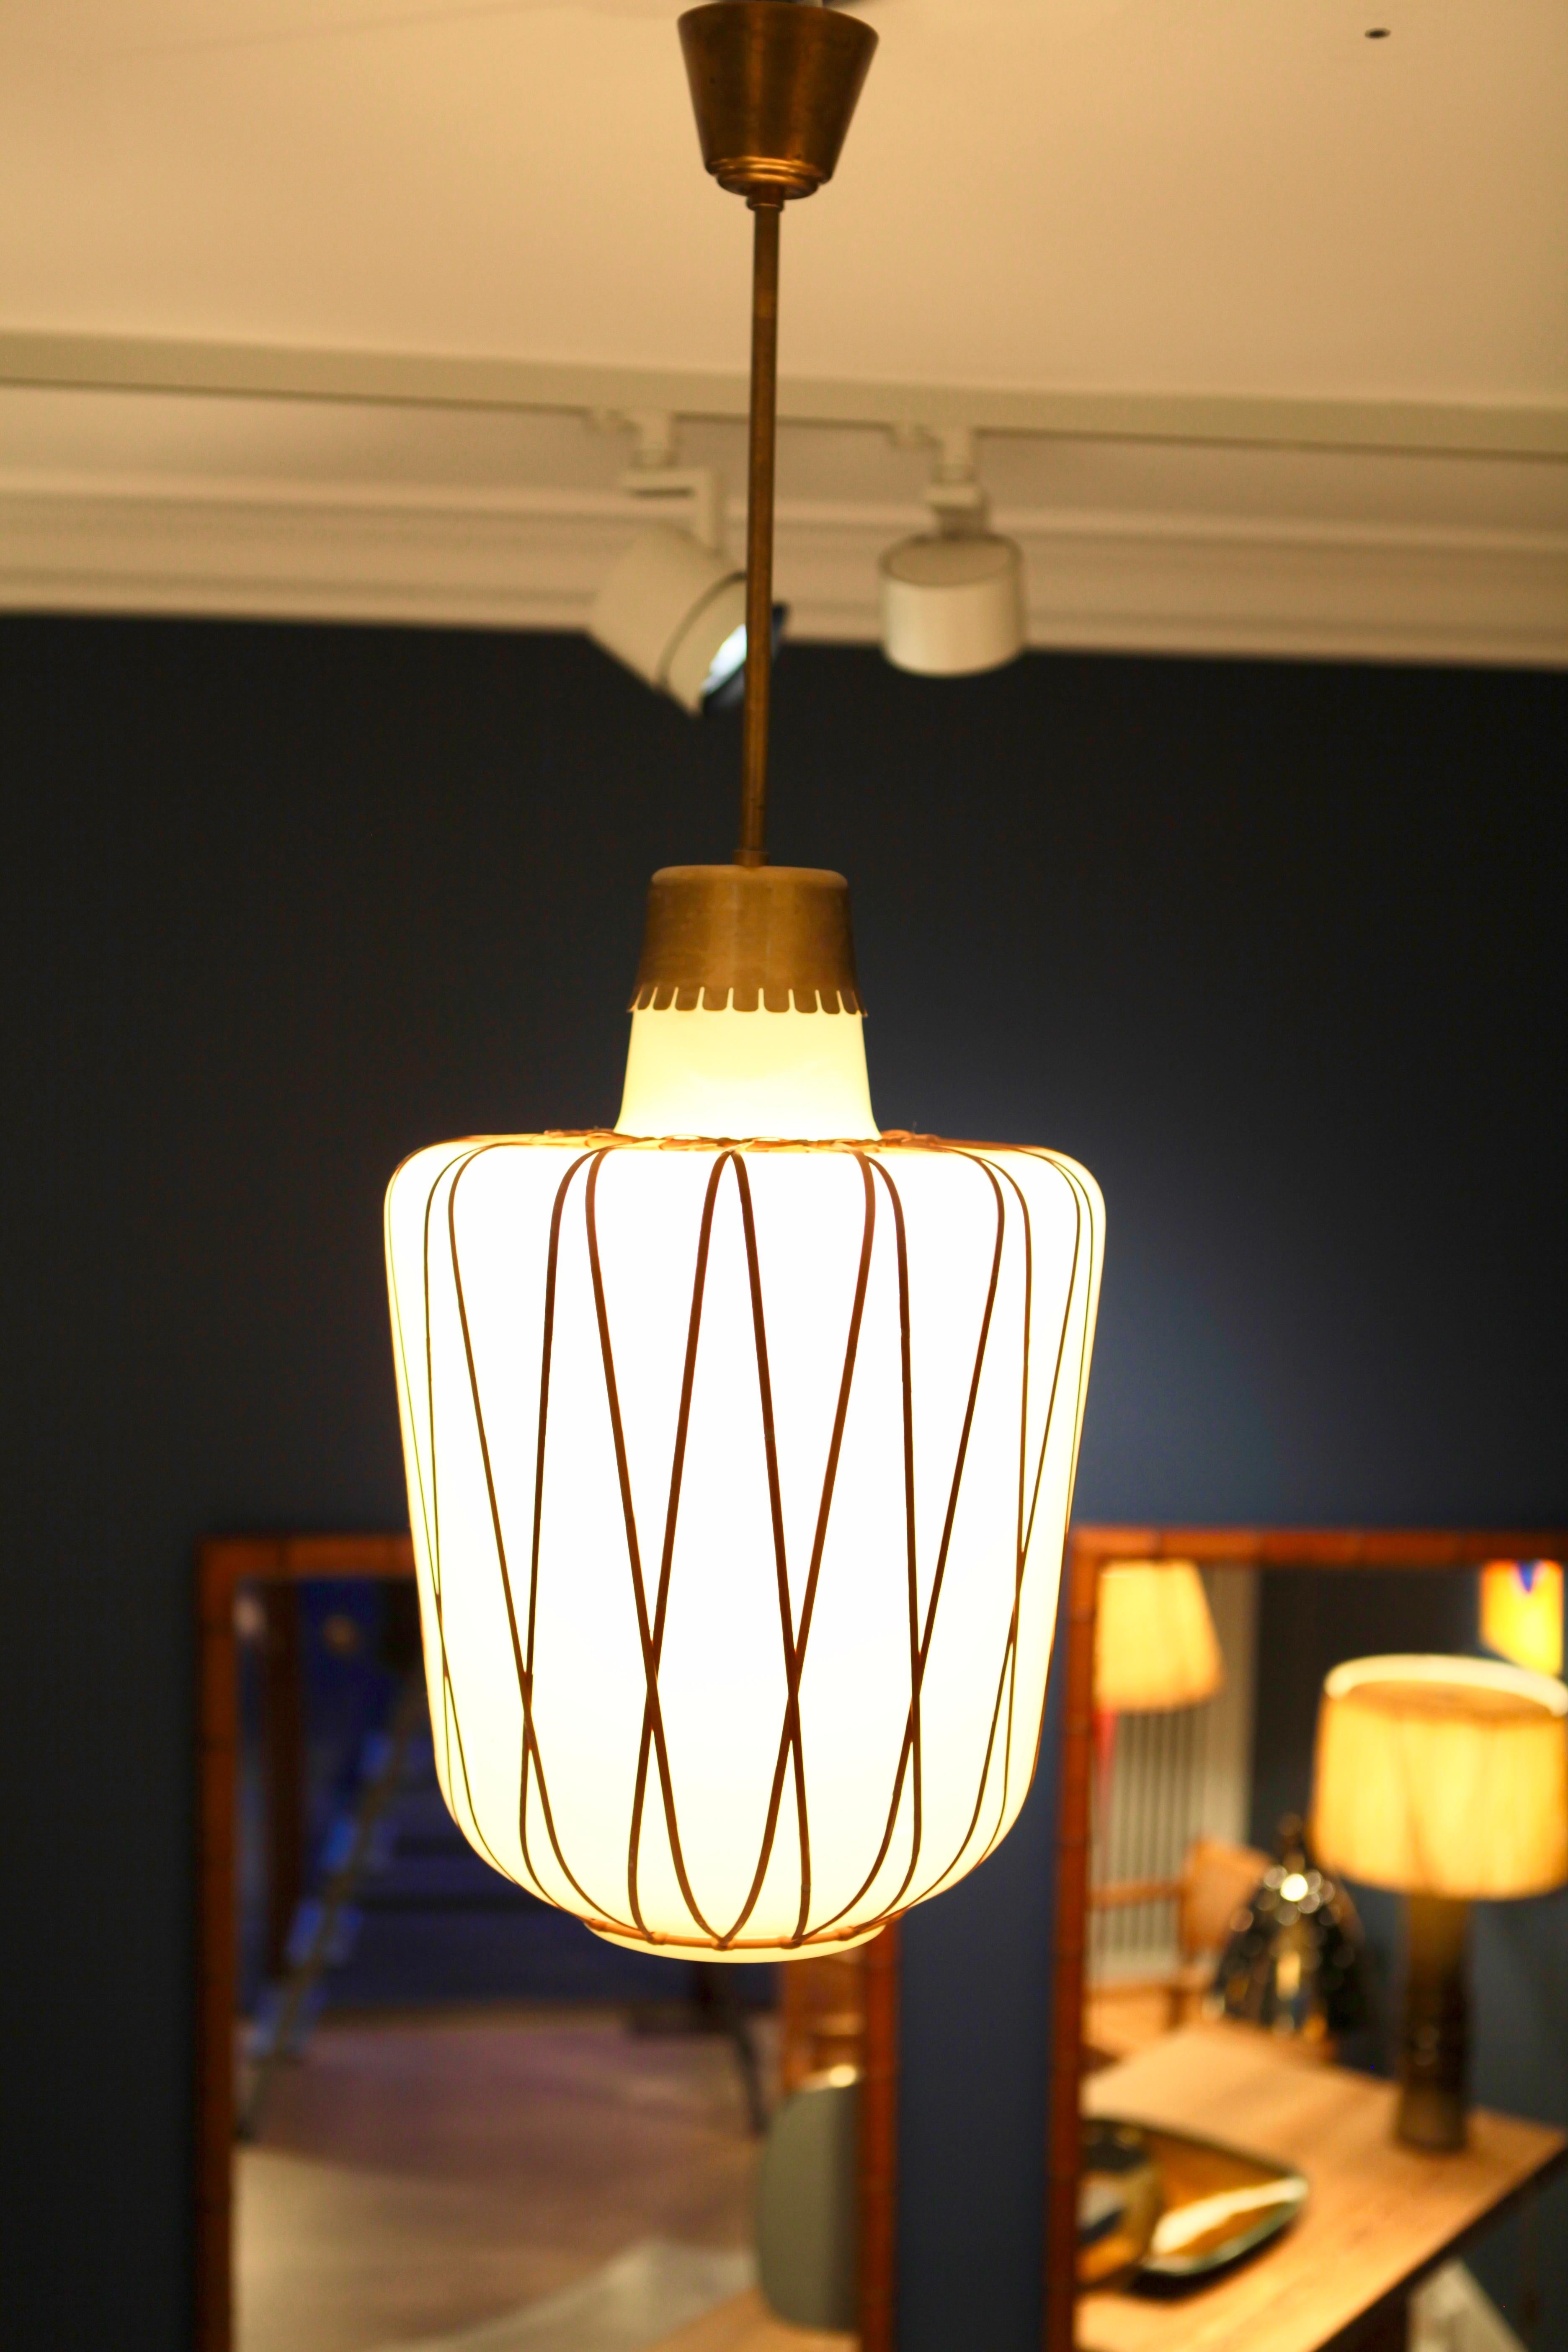 Ceiling lamp by the Swedish designer Harald Notini.
Yellow, White overlay glass with cane decoration and brass fitting.
Manufactured by Böhlmarks in the 1940s.
Literature: Katalog, Böhlmarks - Elektrisk Belysningsarmatur